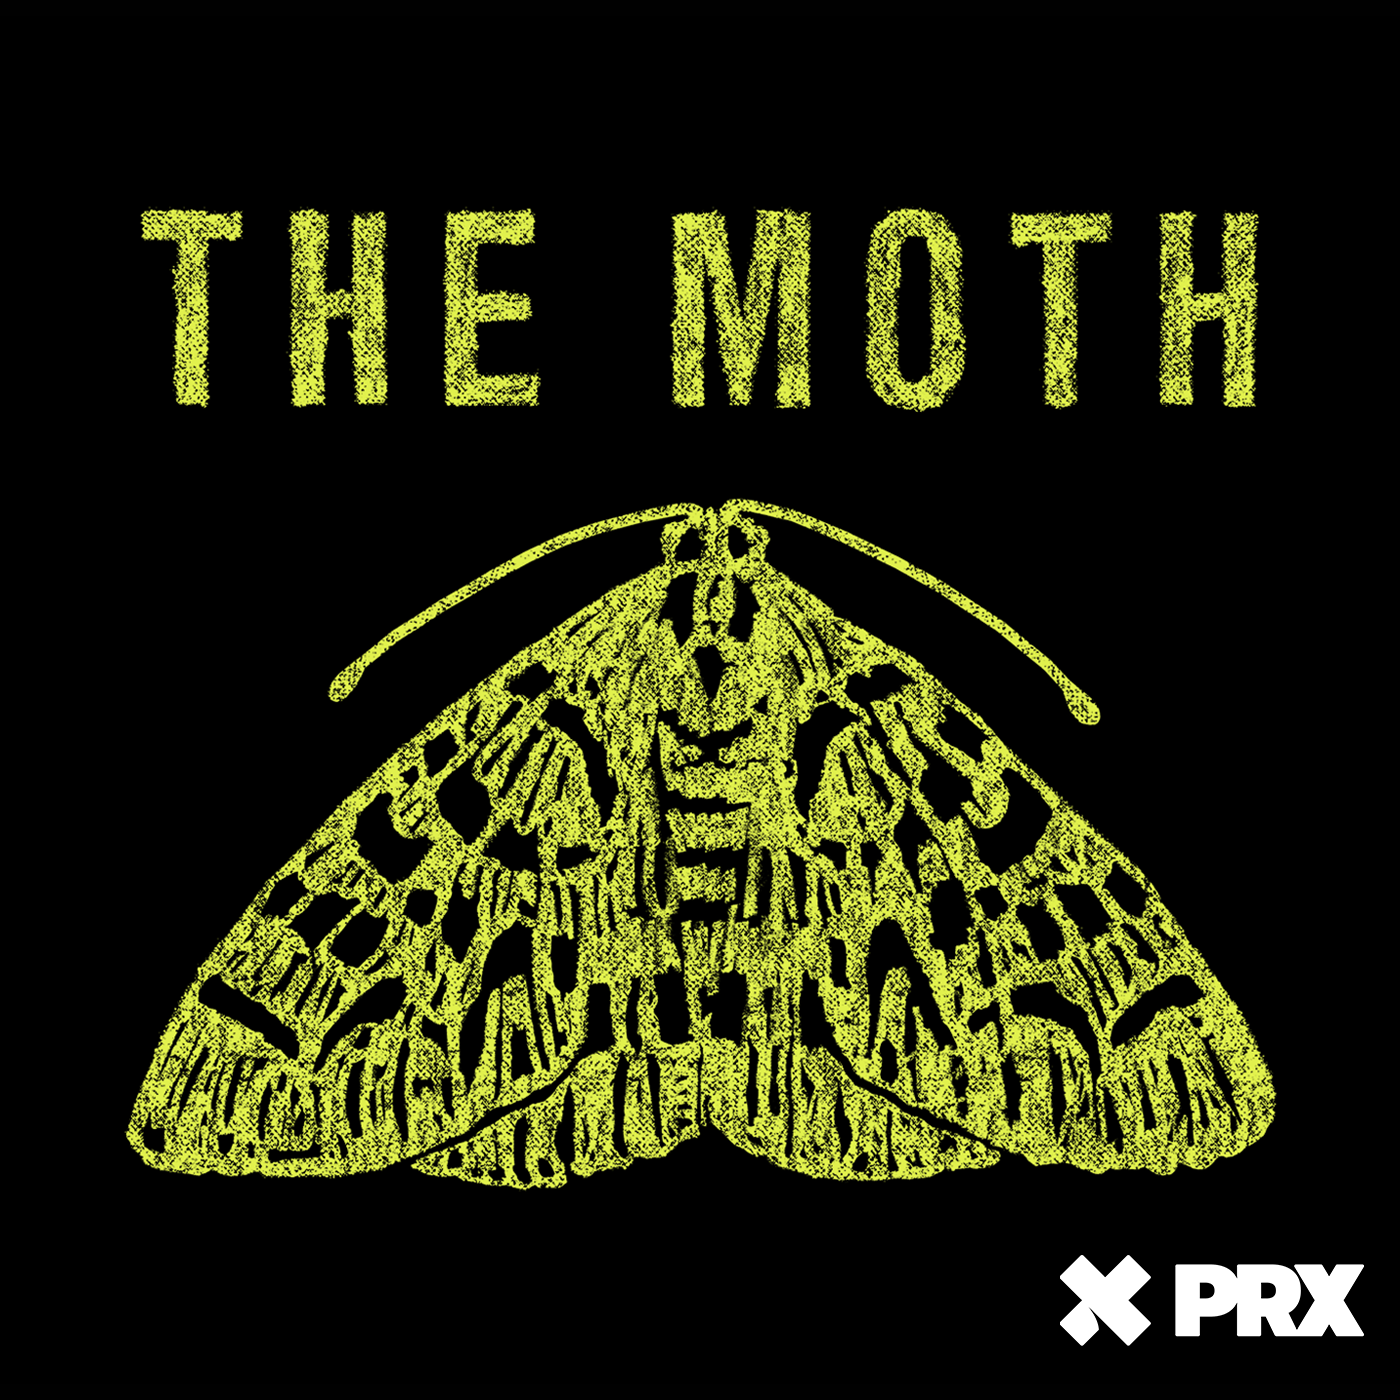 The Moth Radio Hour: Hidden Treasure - Live from The Moth’s Education Showcase